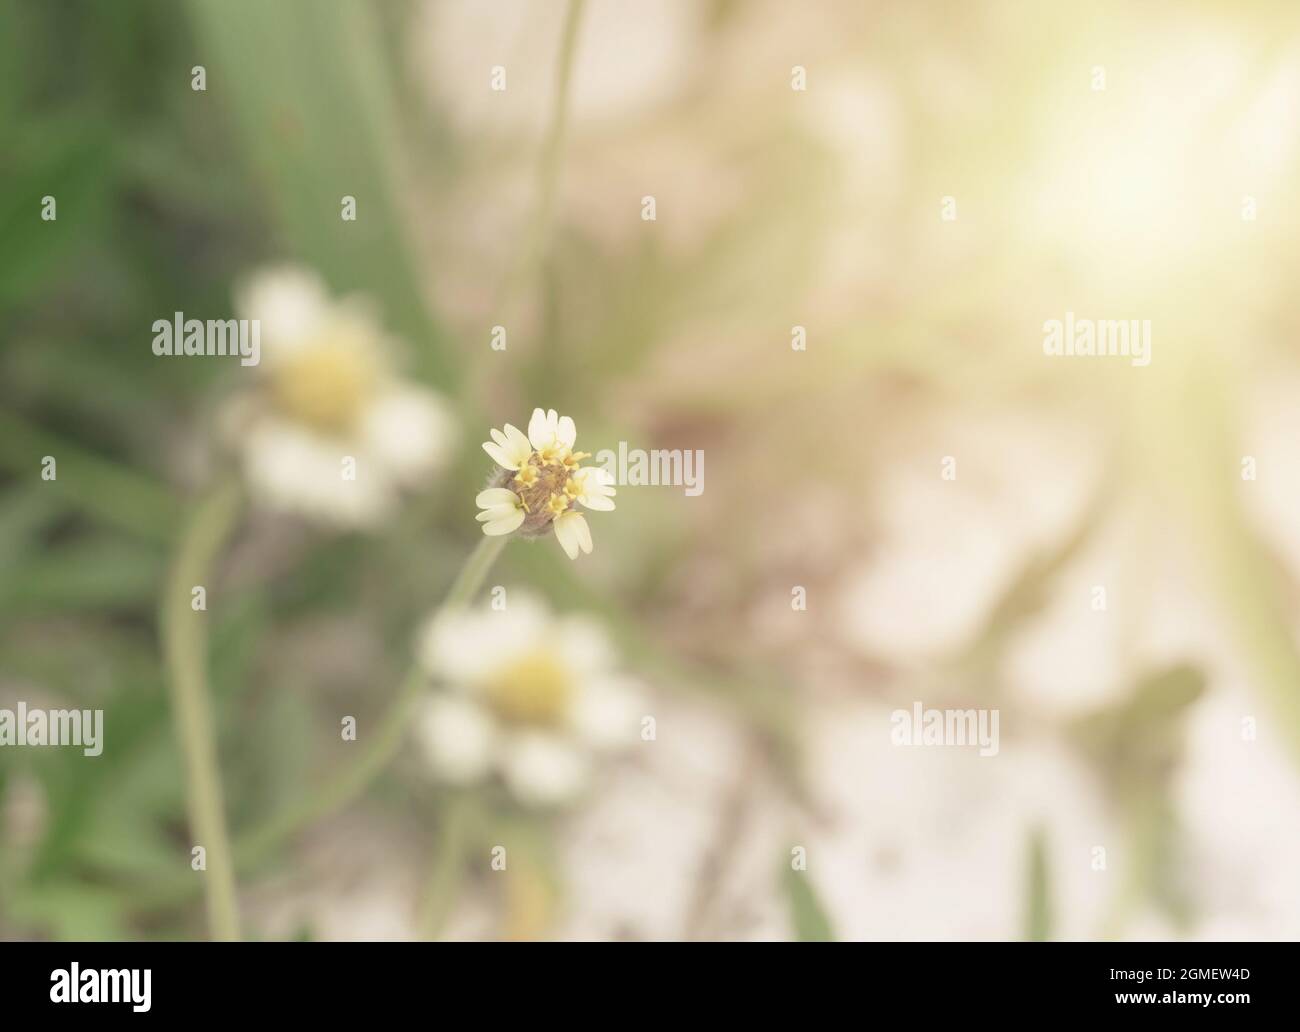 Coat buttons, Mexican daisy, Tridax daisy, or Wild Daisy grass flower with colored filter effect and selective focus Stock Photo